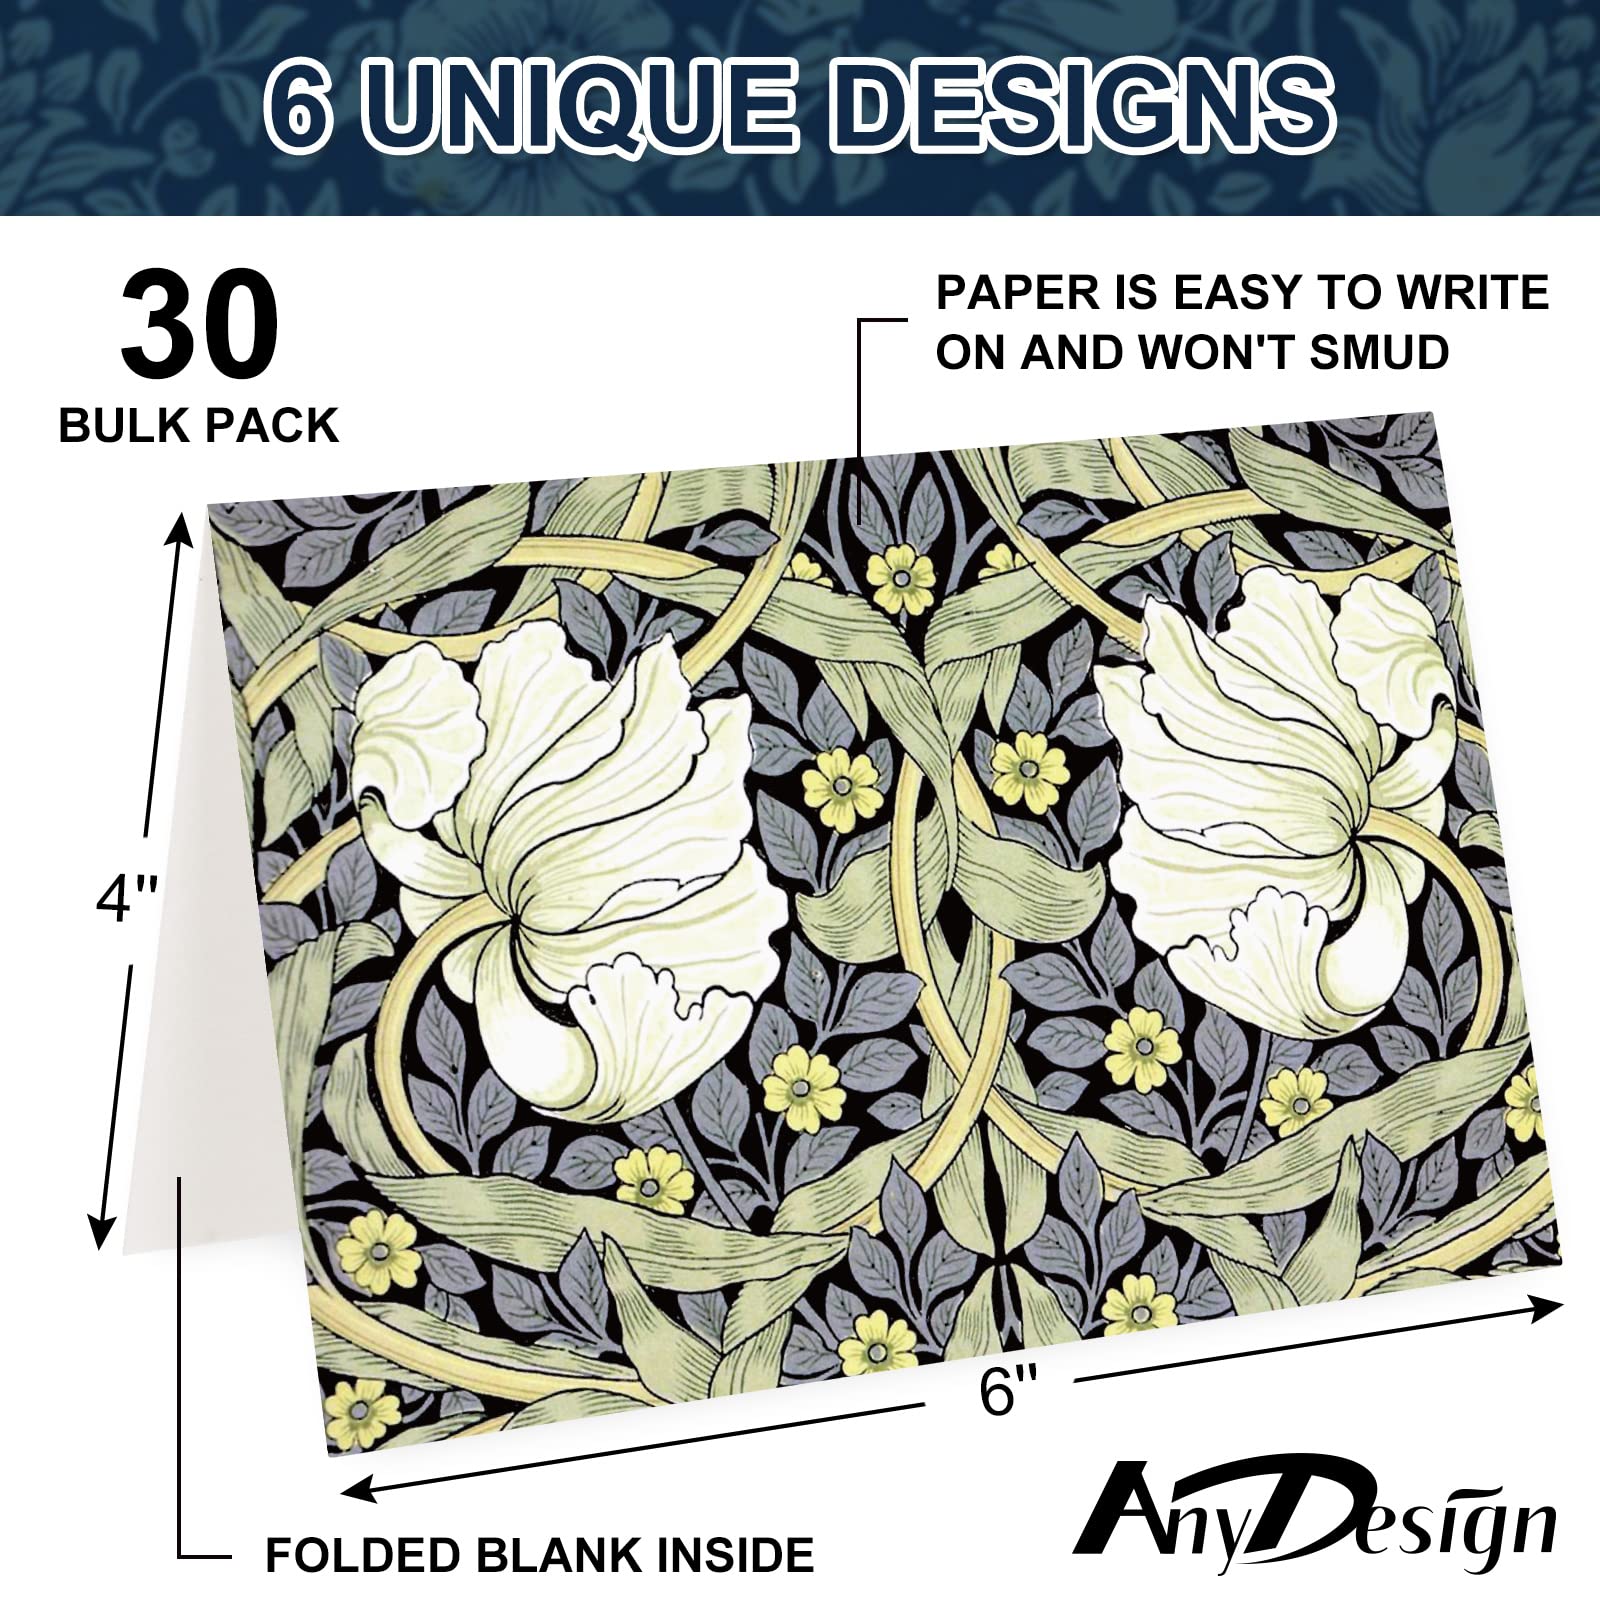 AnyDesign William Morris Greeting Cards with Envelopes Stickers Vintage Floral Stationery Cards Retro Flower Blank Note Cards for Wedding Birthday Baby Shower Thank You Supplies, 4 x 6 Inch